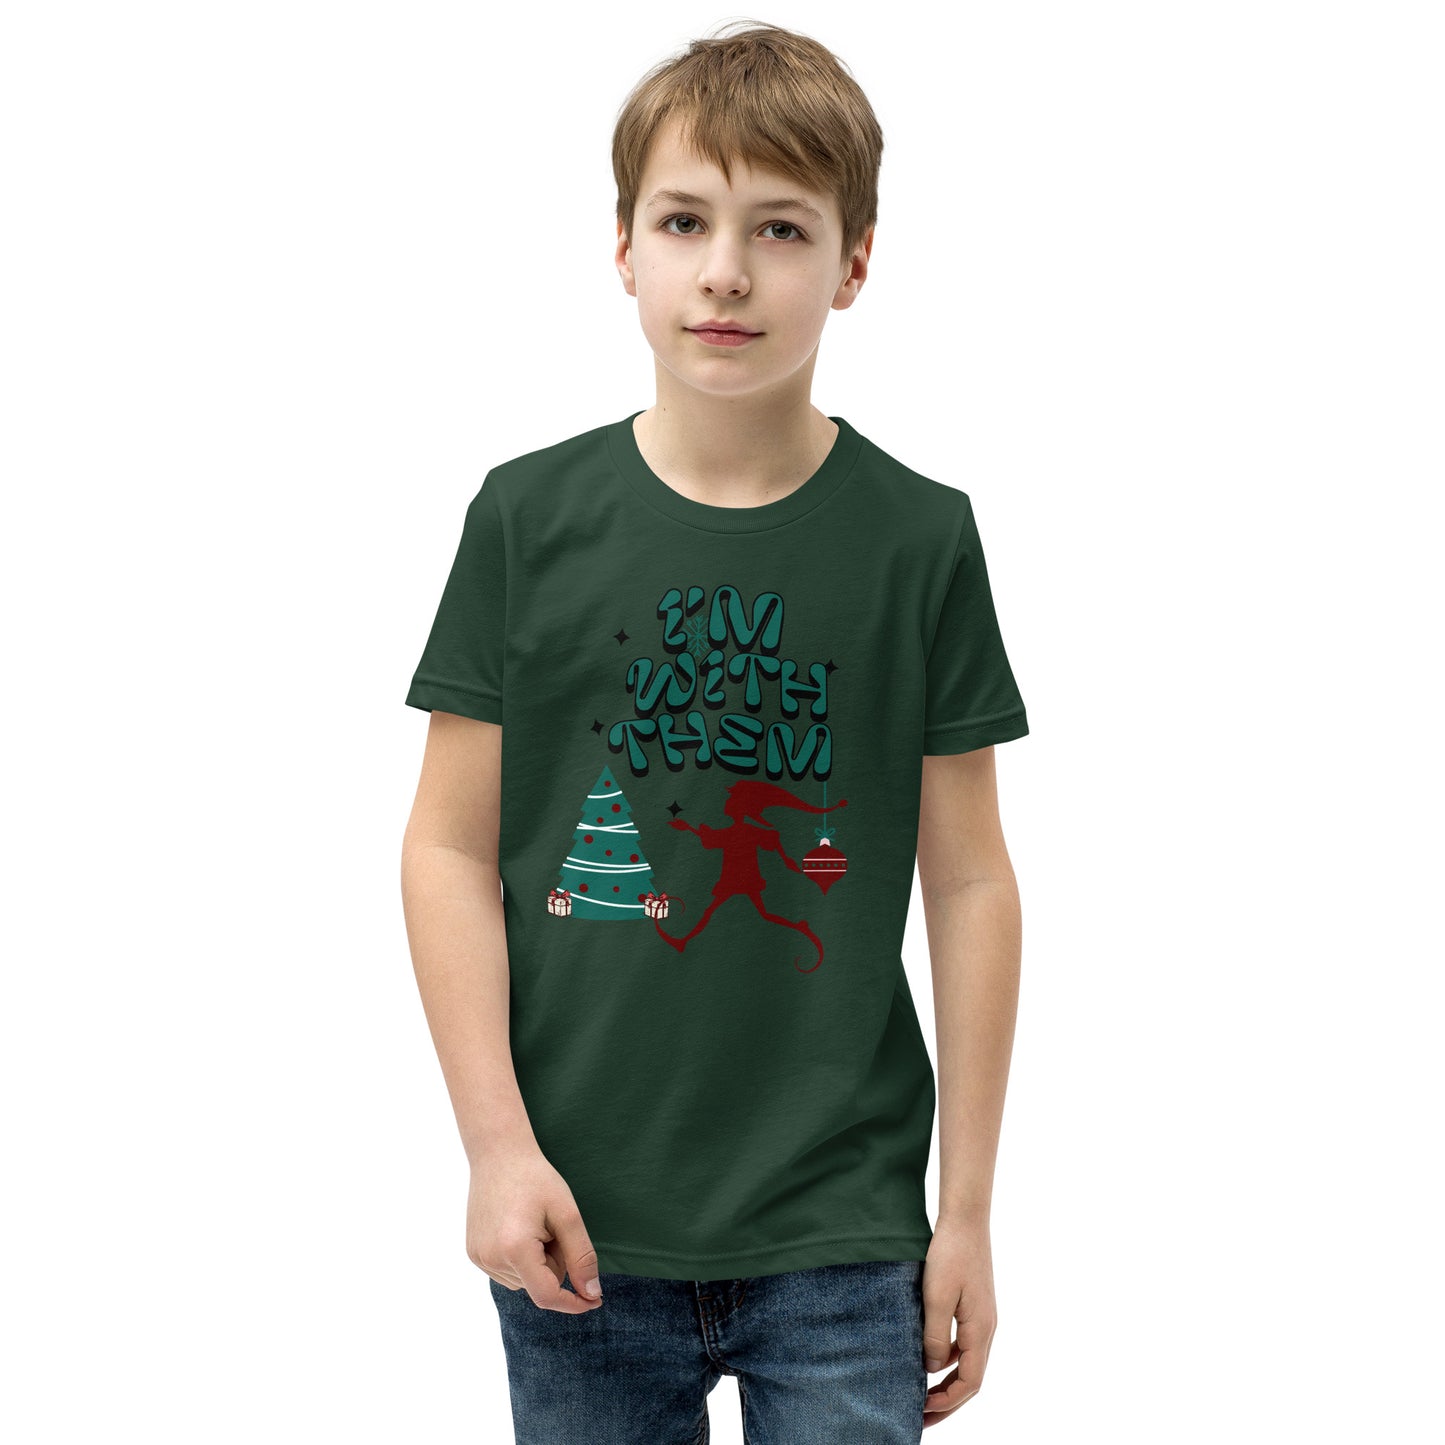 Xmas T-Shirt for Youth- IM WITH THEM!